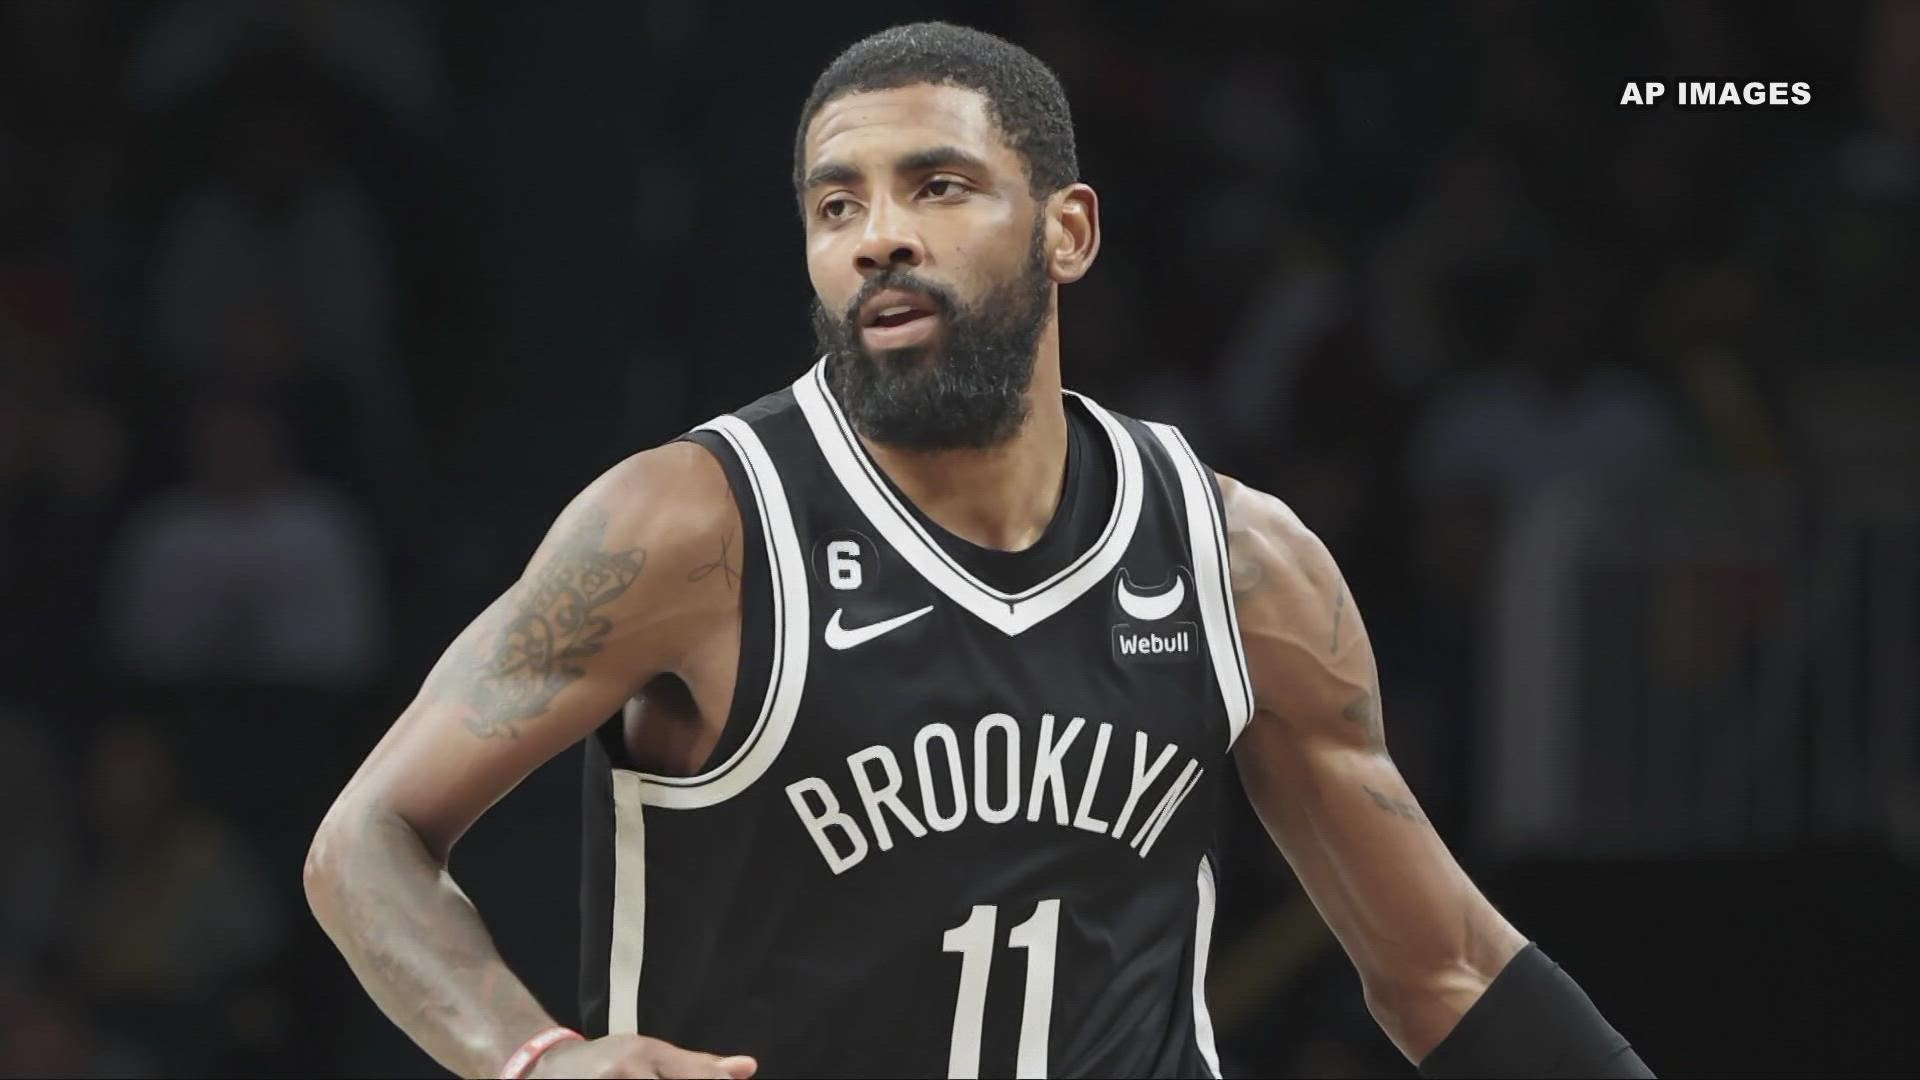 After Irving refused to apologize for sharing an antisemitic work on his Twitter feed, the team said he is is 'unfit to be associated with the Brooklyn Nets.'